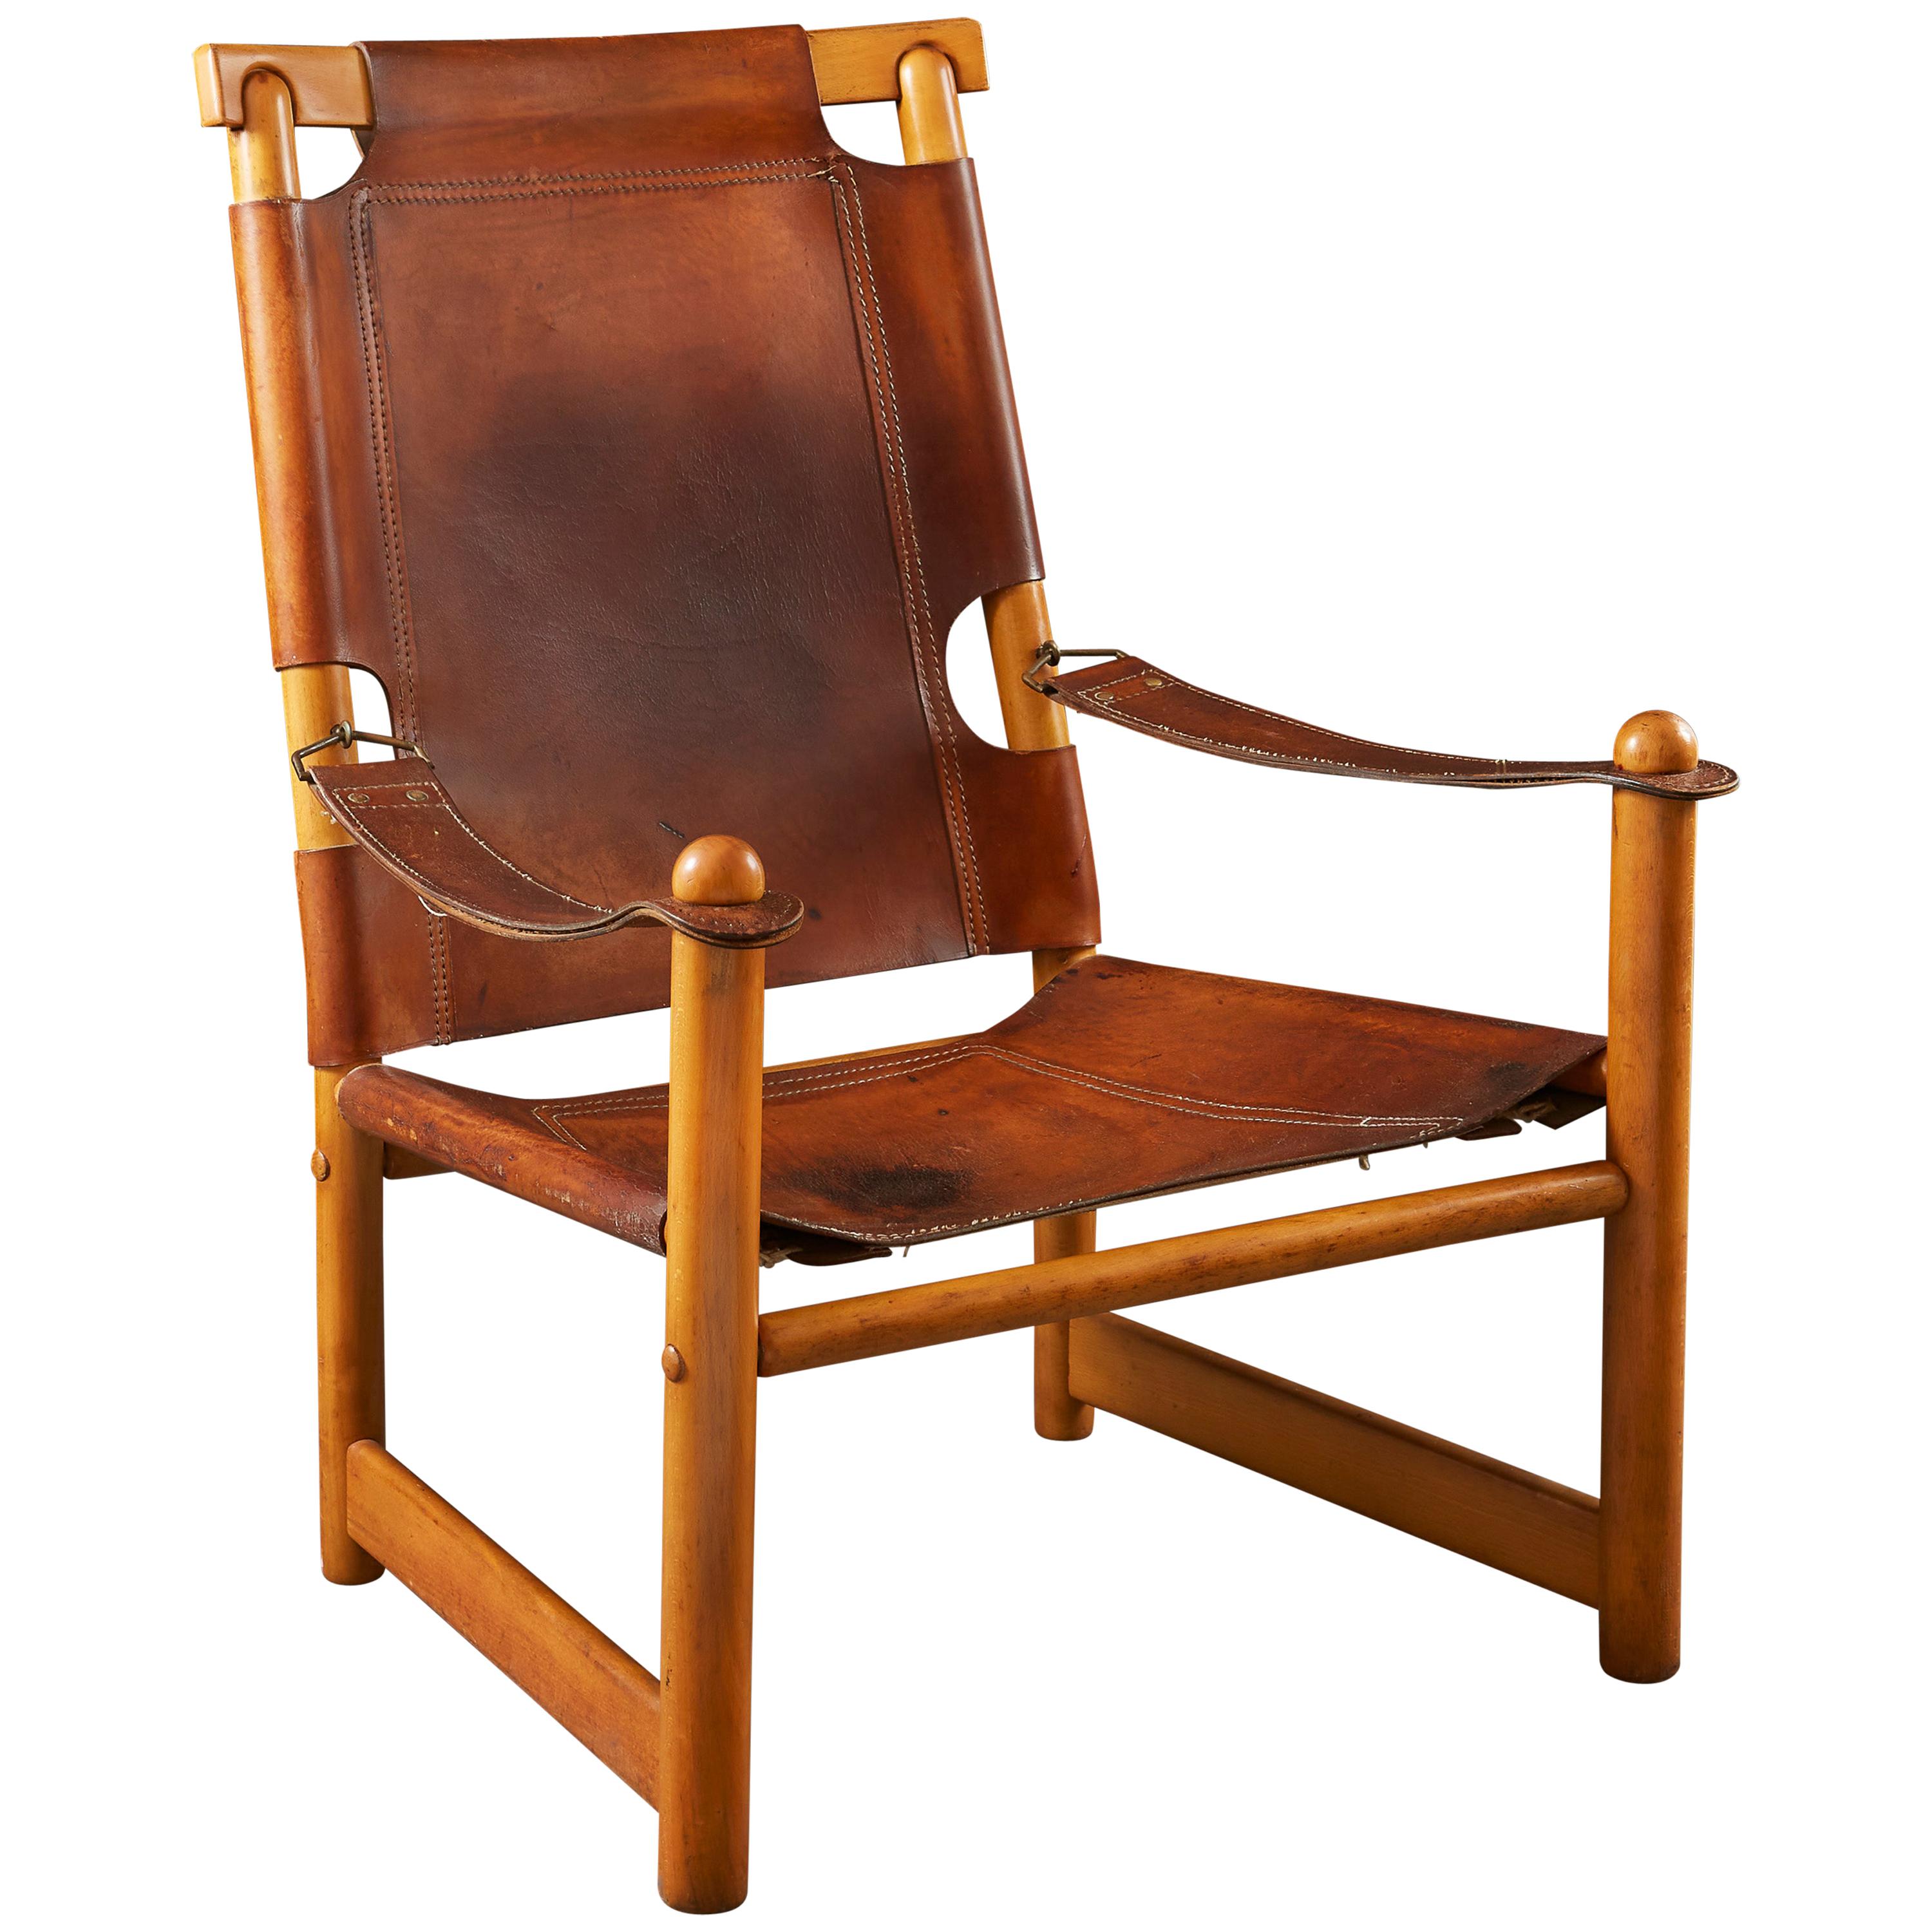 Mid-20th Century Italian Leather and Pine Armchair